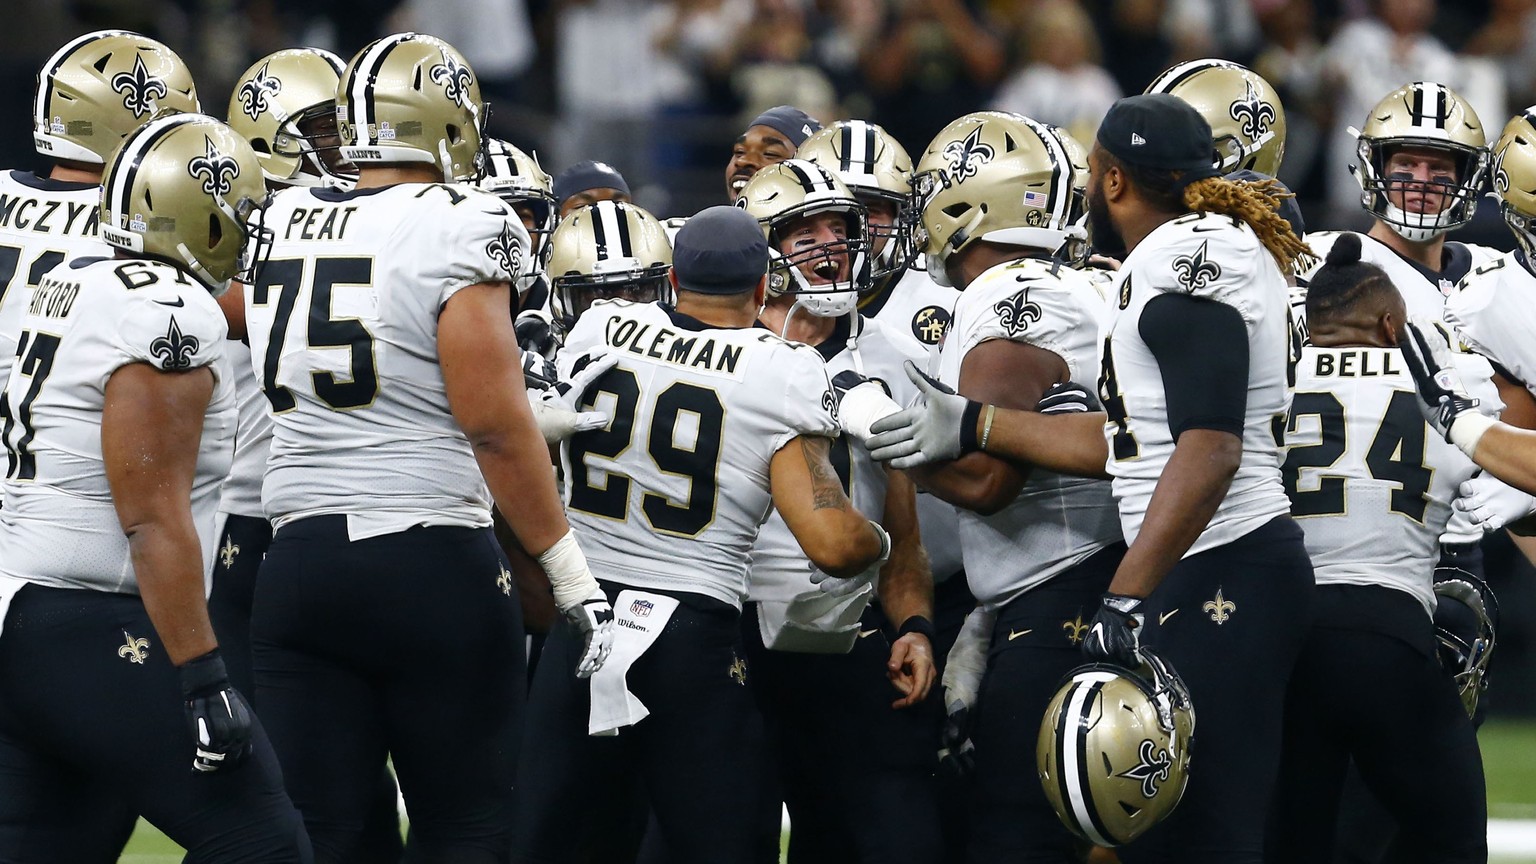 New Orleans Saints players surround quarterback Drew Brees after Brees broke the NFL all-time passing yards record in the first half of an NFL football game against the Washington Redskins in New Orle ...